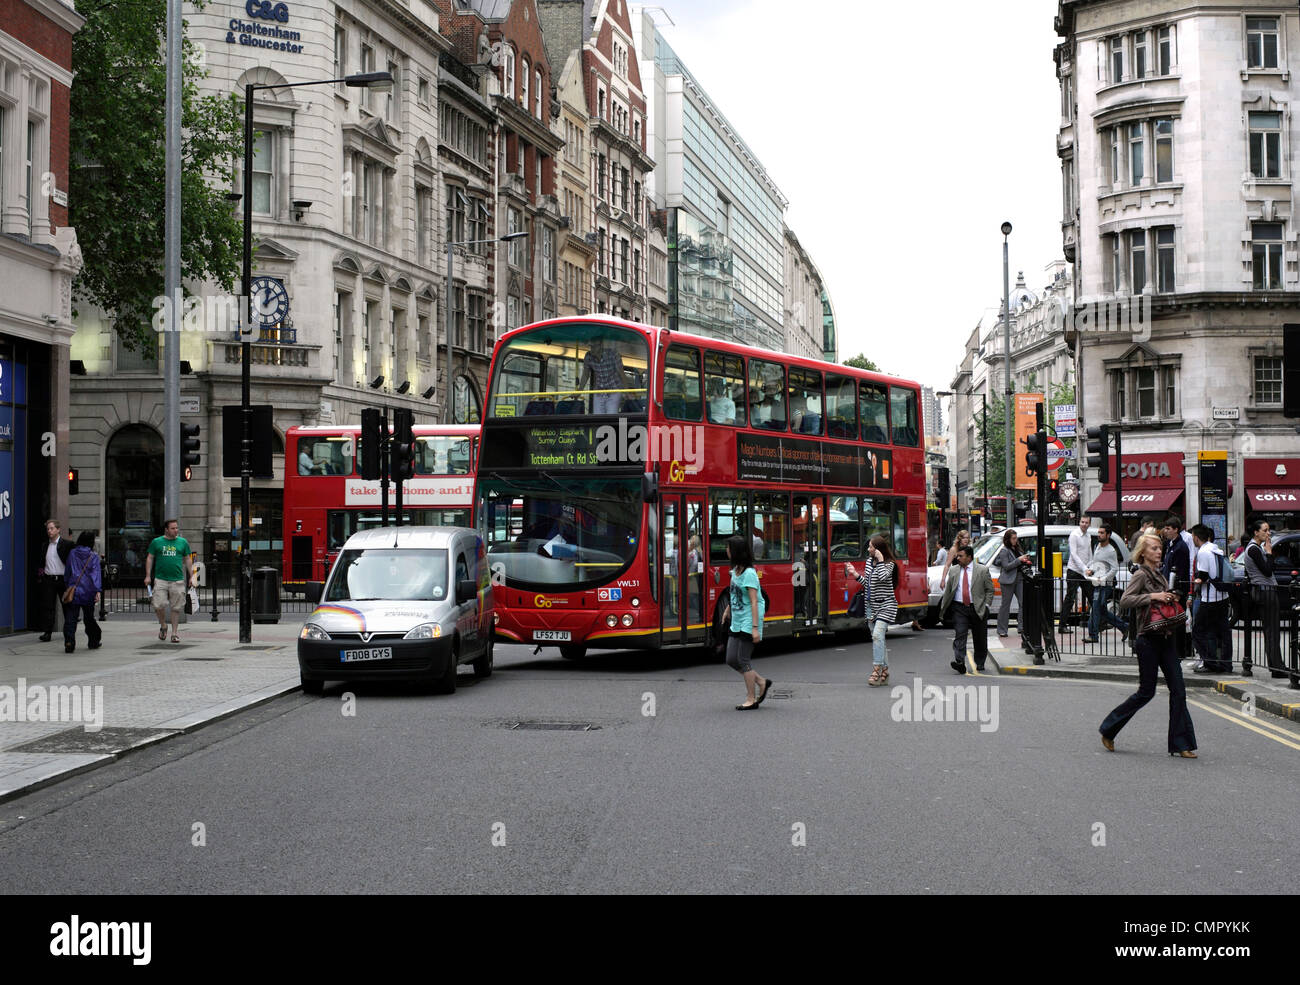 A London bus unable to turn and held up by an illegally parked van, High Holborn, central London. Stock Photo